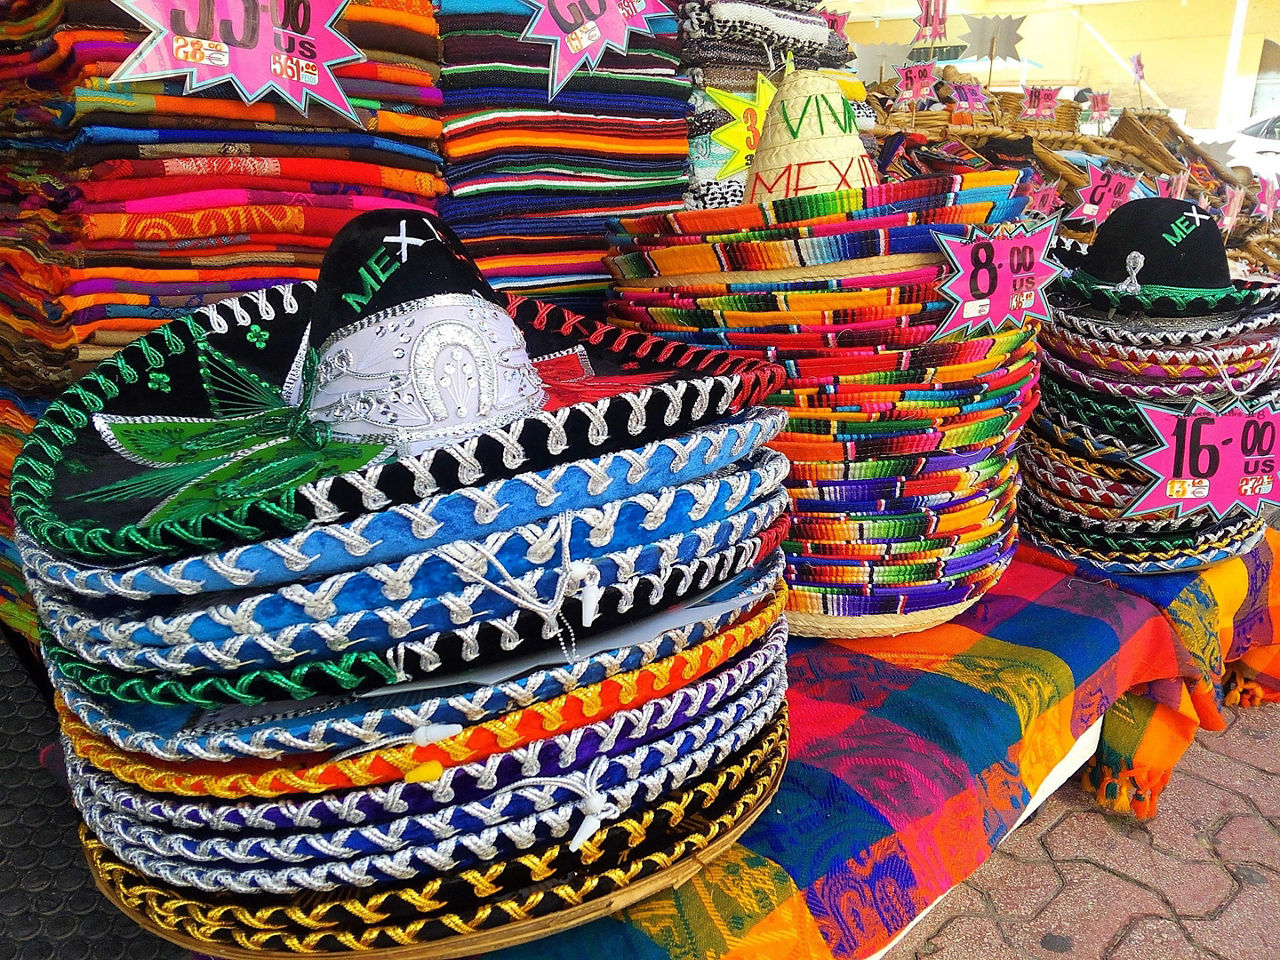 Piles of traditional colorful Mexican hats sold in souvenir shops